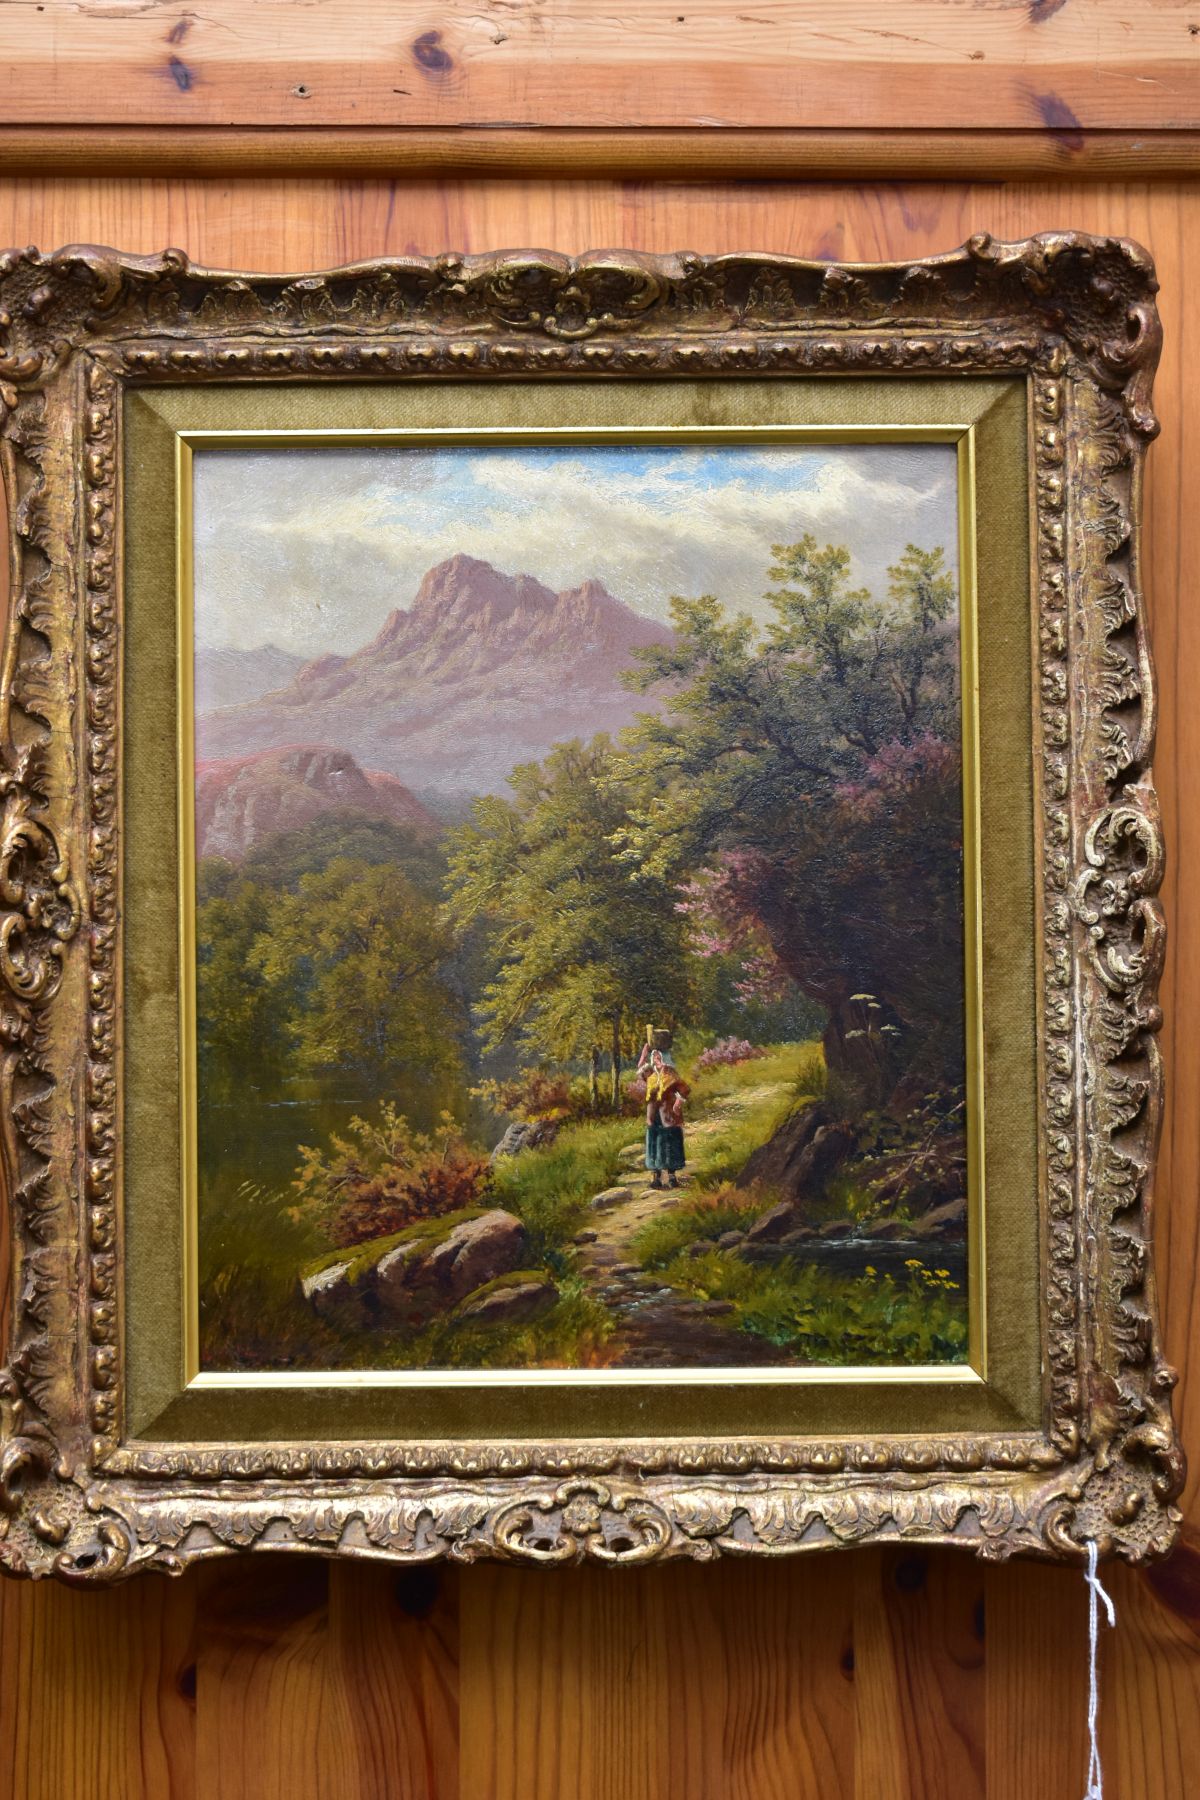 BOLTON KINCAID (19TH/20TH CENTURY) a female figure walking beside water, mountainous background